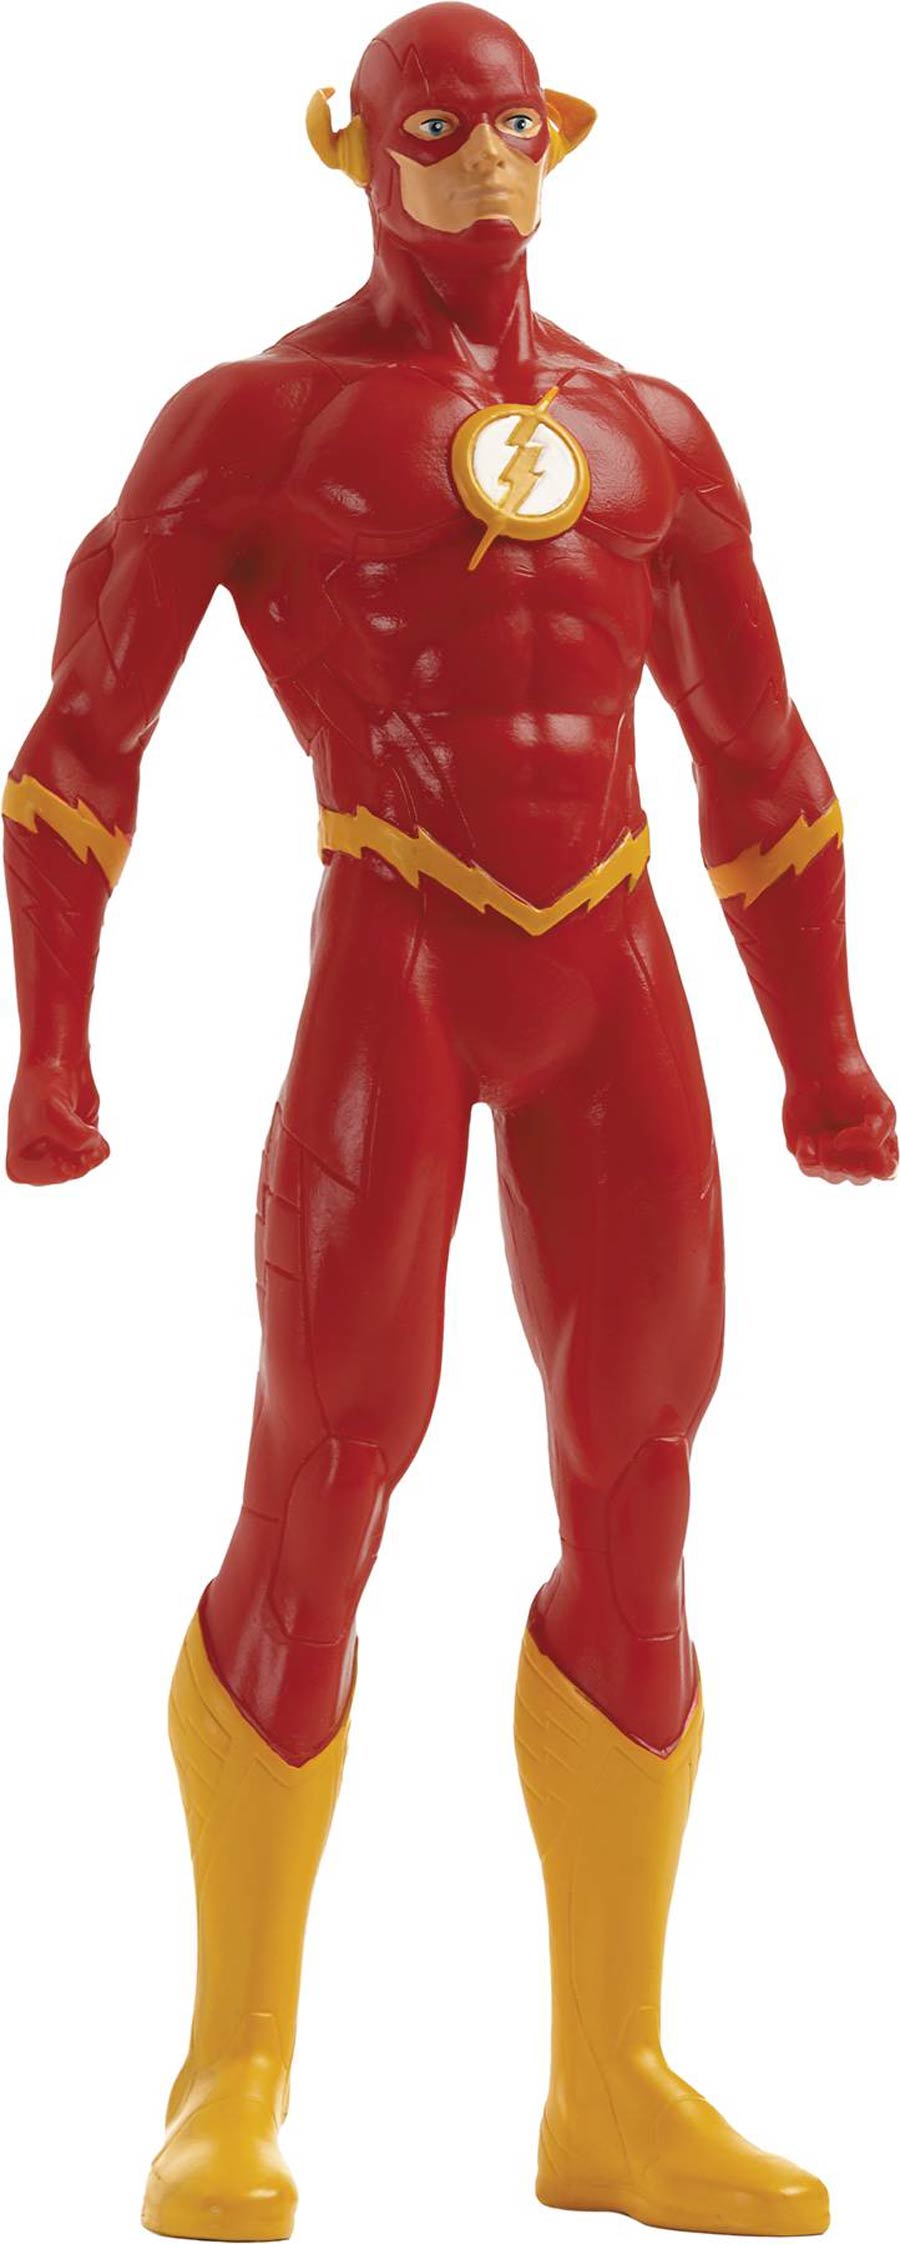 Justice League New 52 Flash 8-inch Bendable Figure